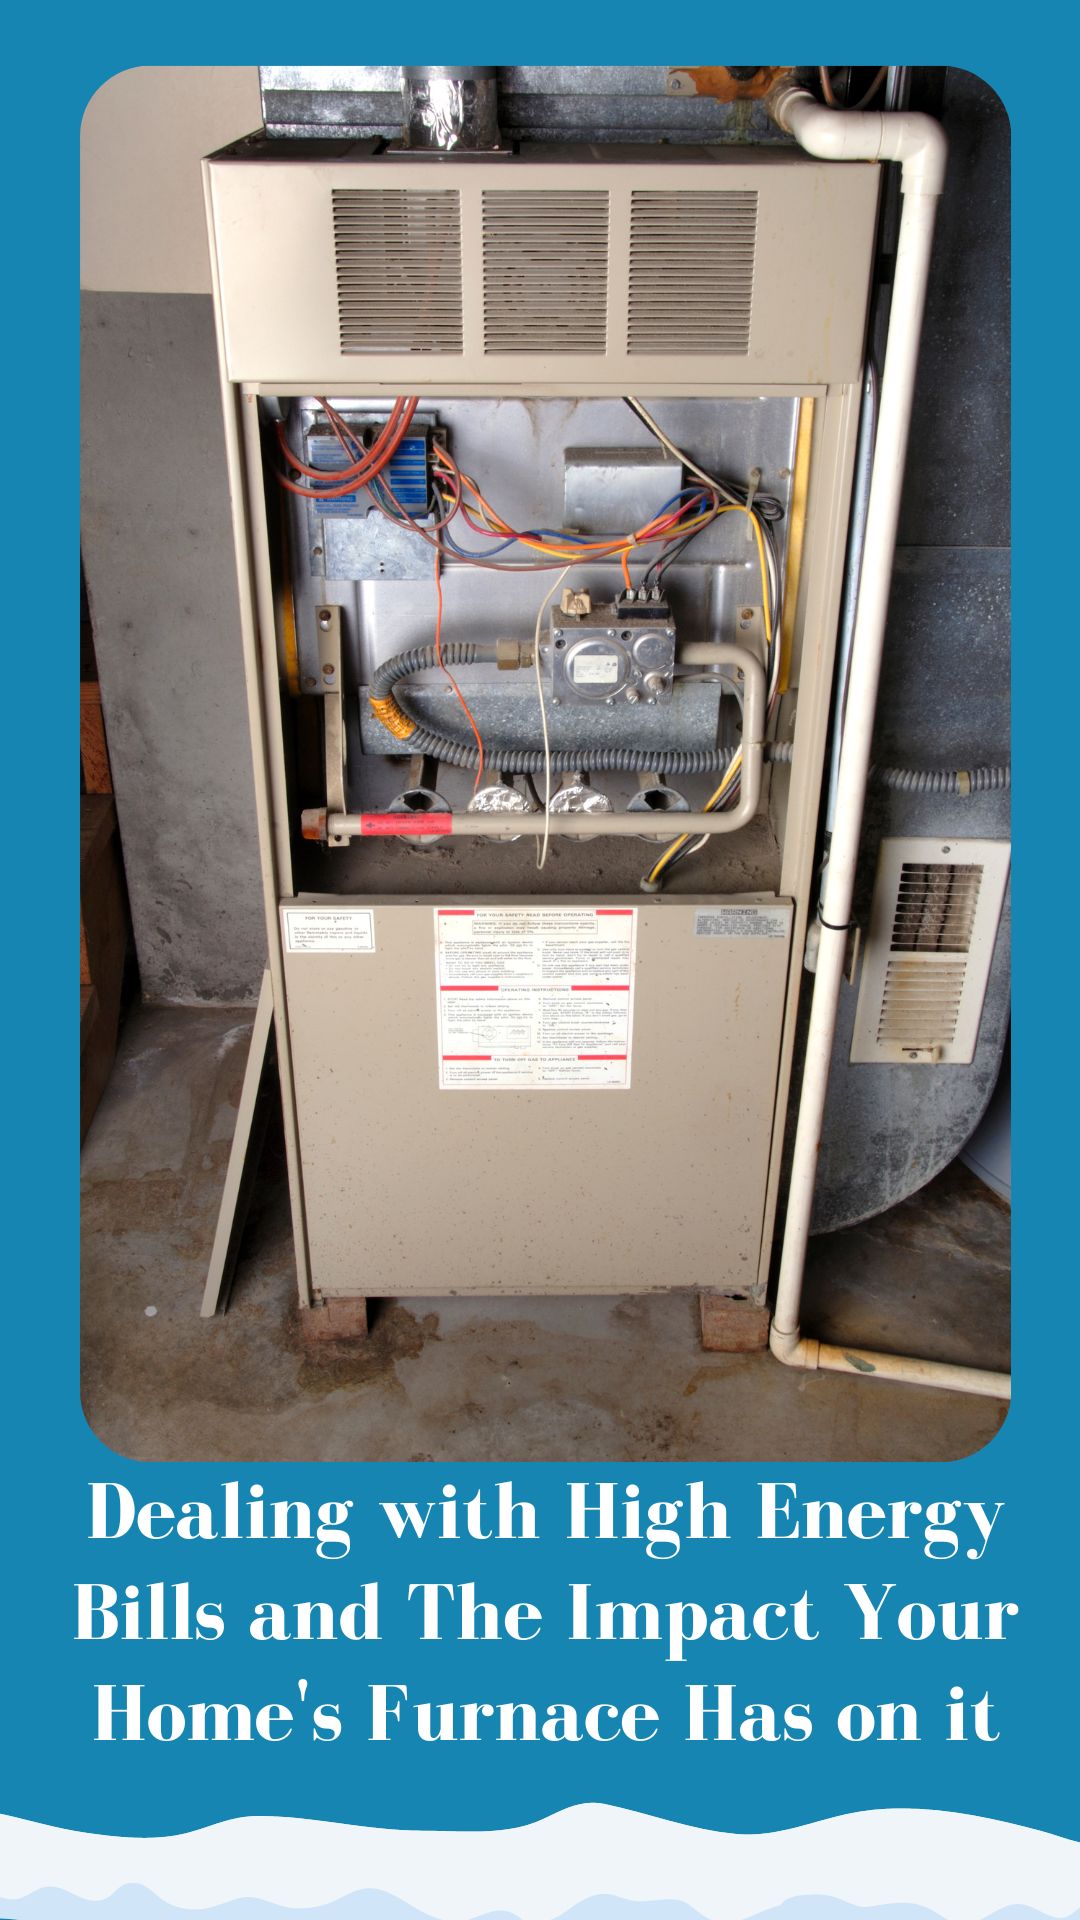 Dealing with High Energy Bills and The Impact Your Home's Furnace Has on it